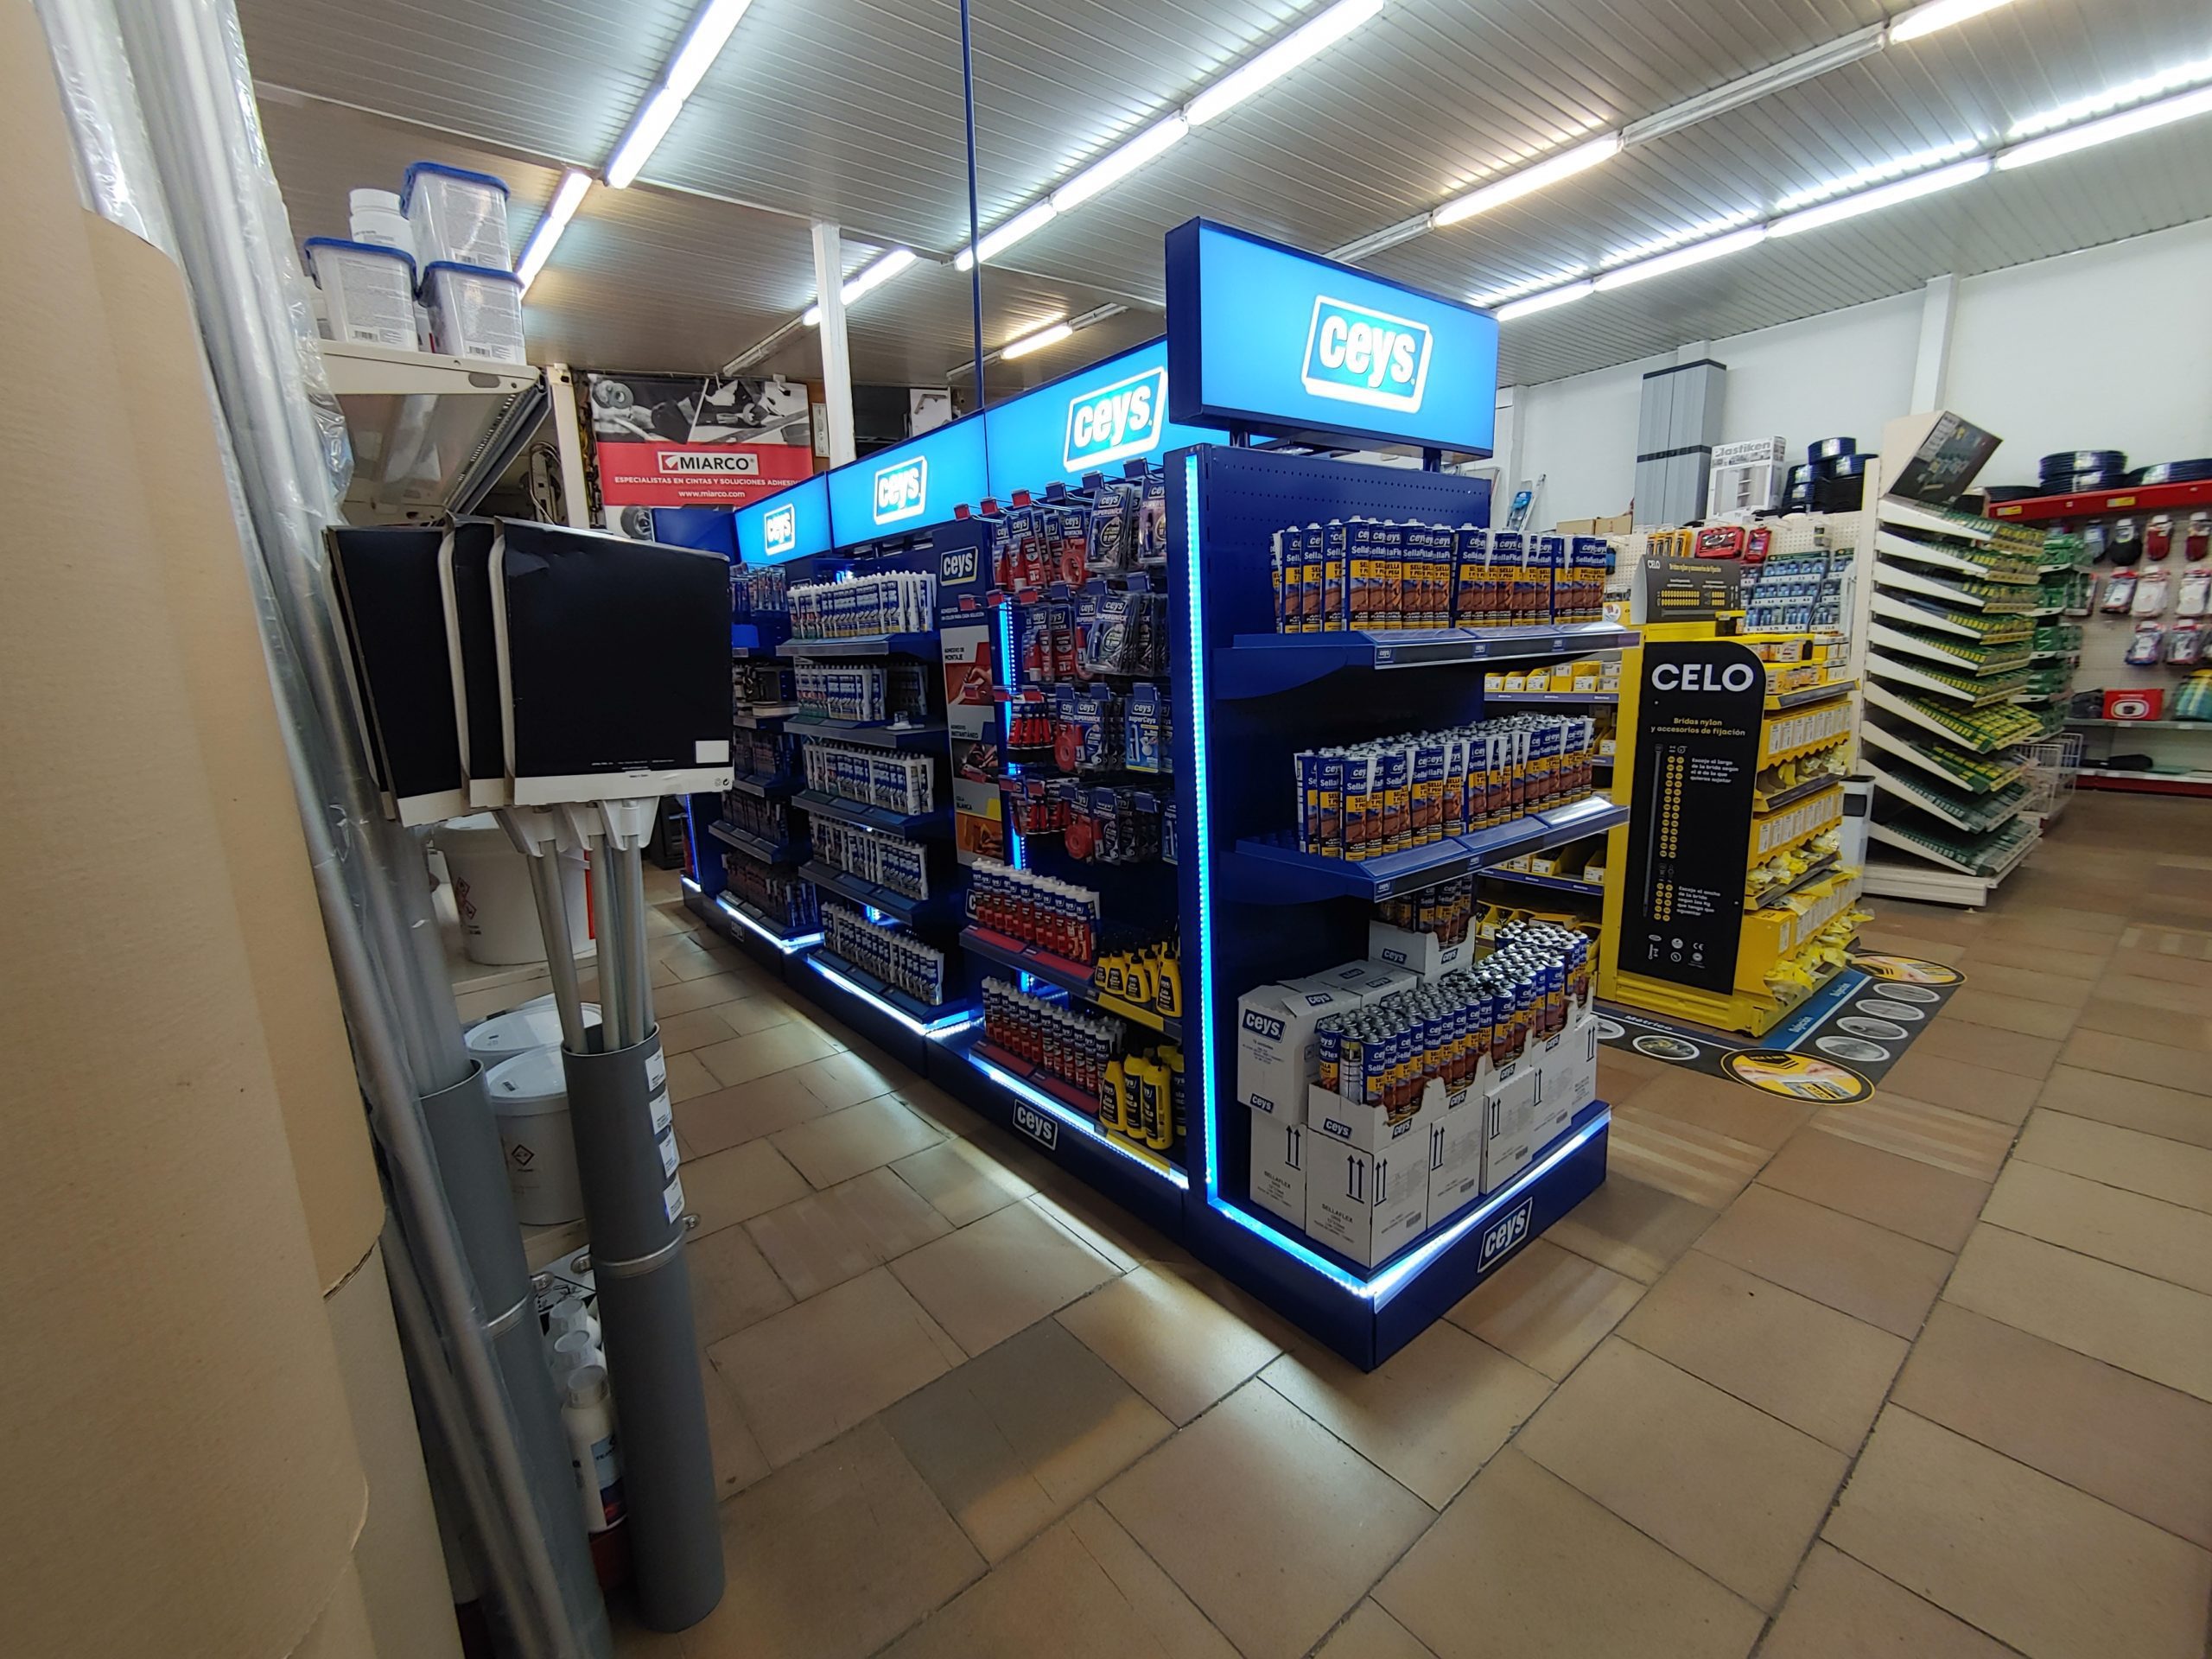 Ceys point-of-sale display.